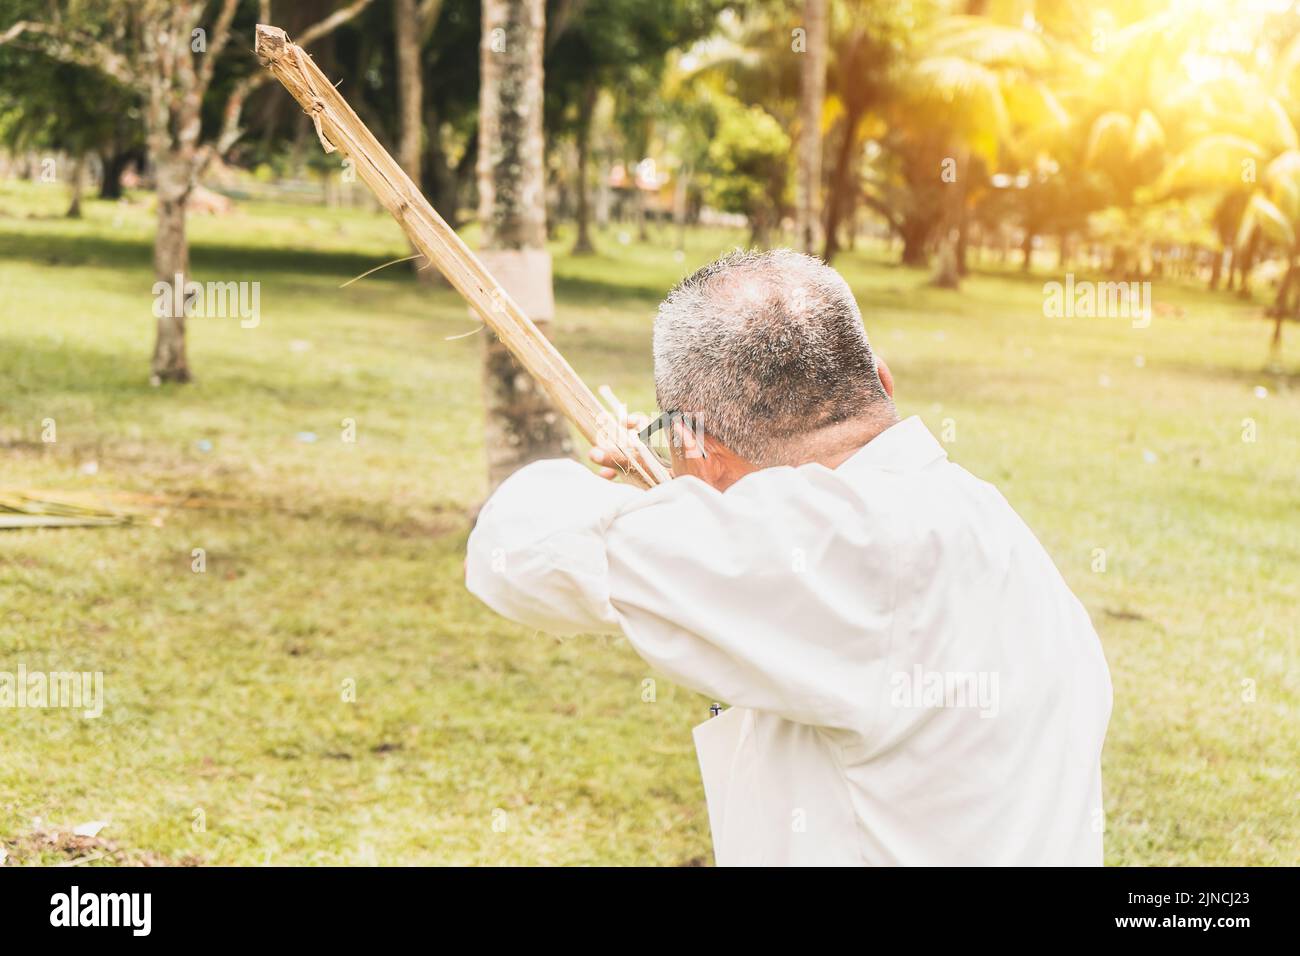 Old man from Nicaragua, Central America, aiming at a target with a bow and arrow Stock Photo